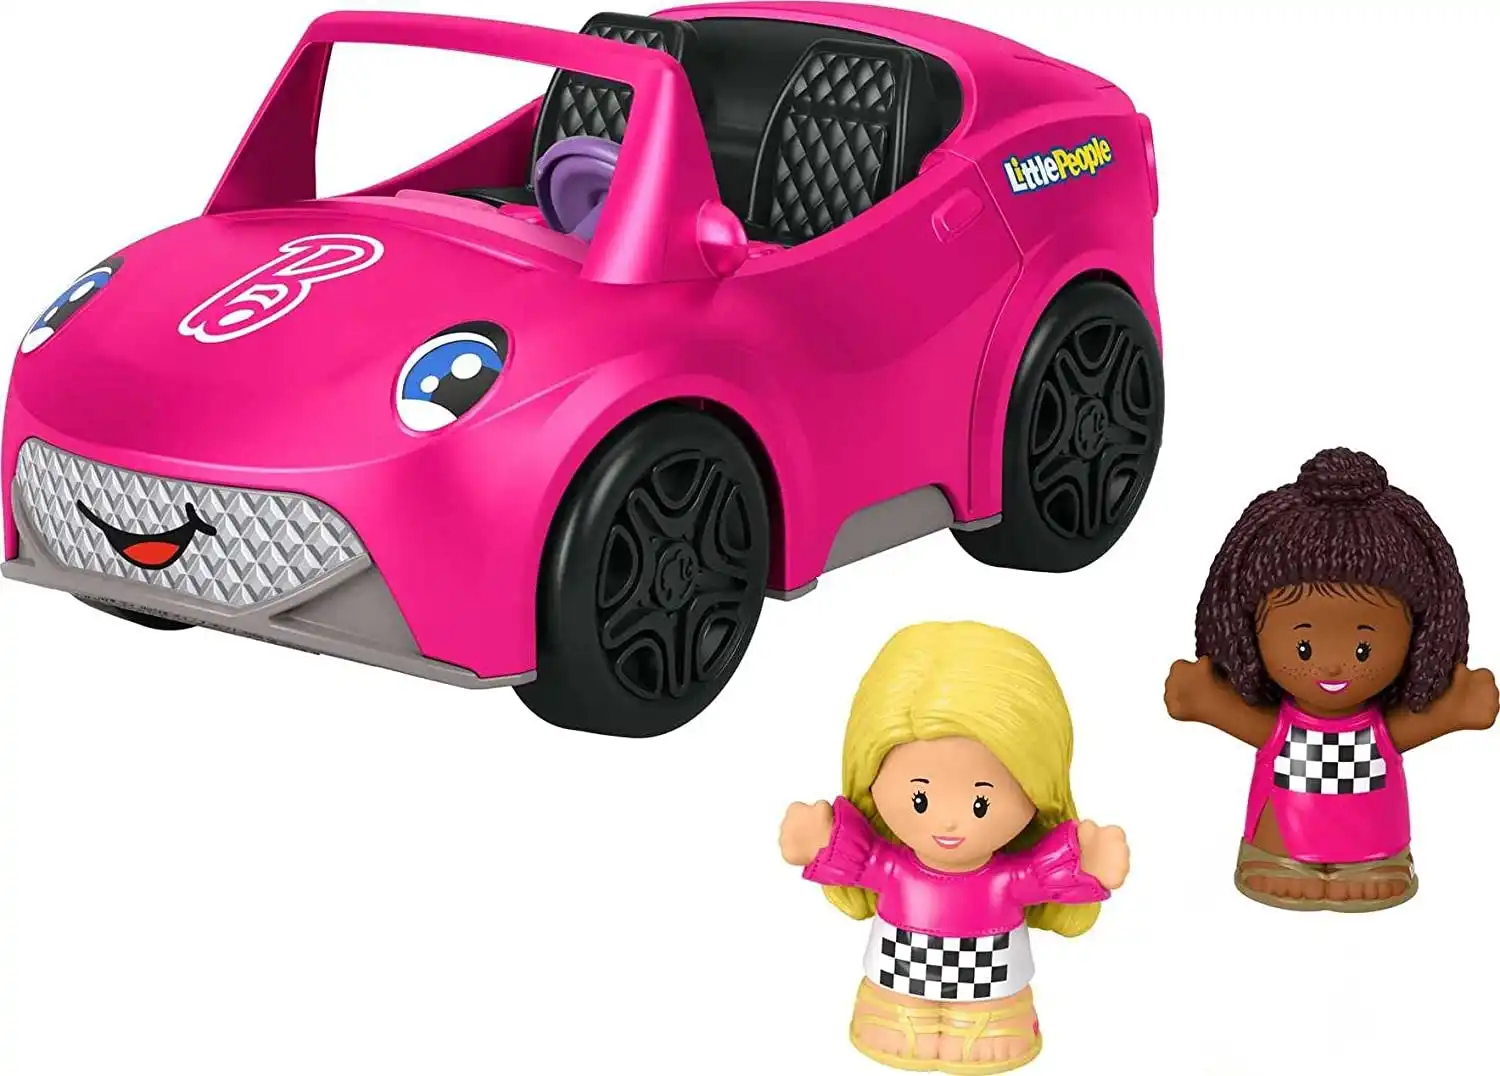 Little People Barbie Convertible Toy Car With Music Sounds & 2 Figures